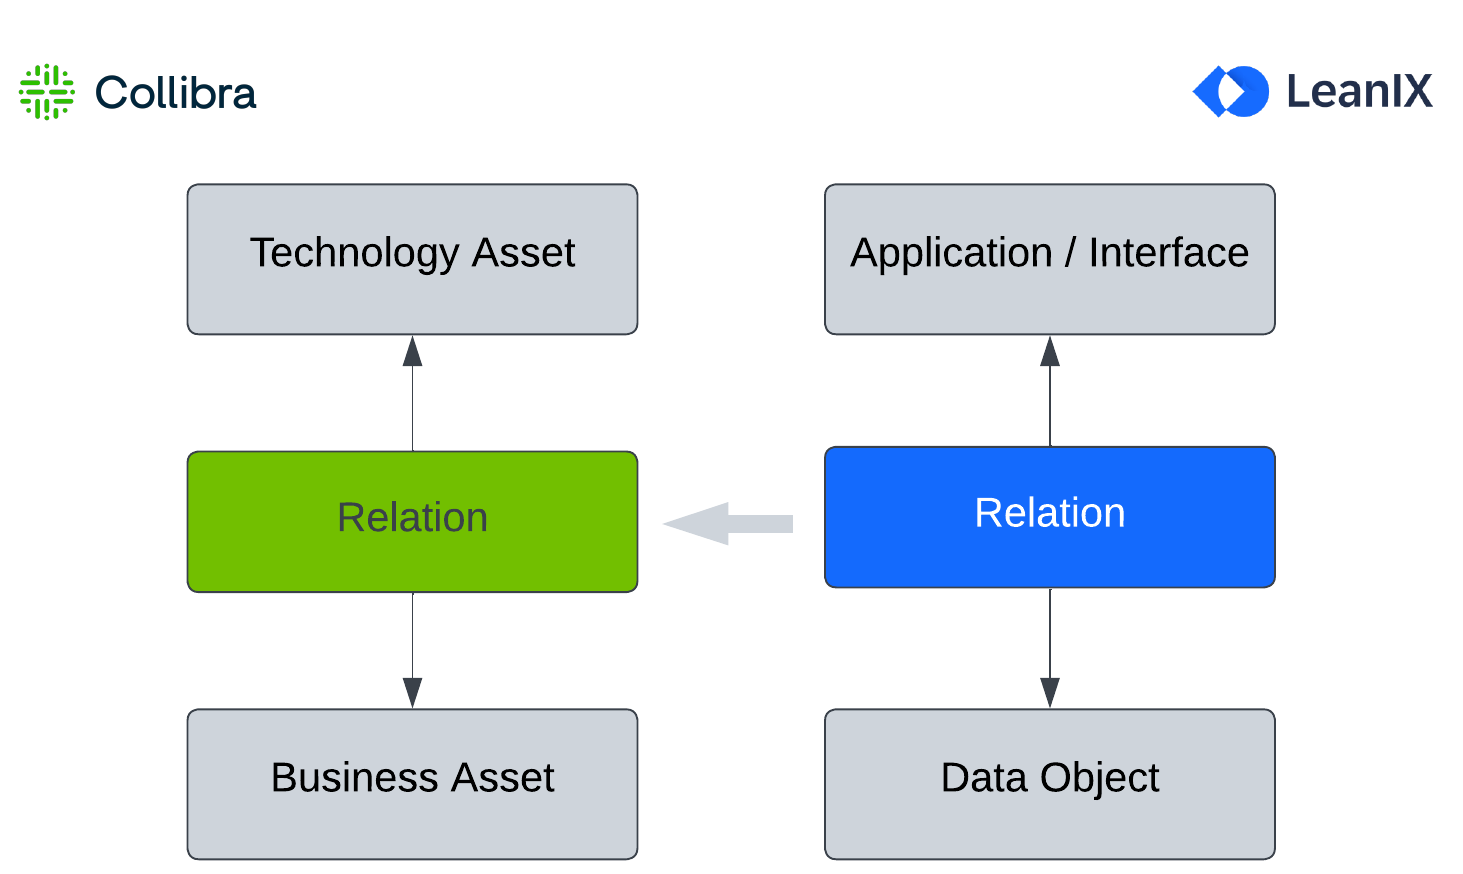 Mapping of Relation Between Application/Interface and Data Object